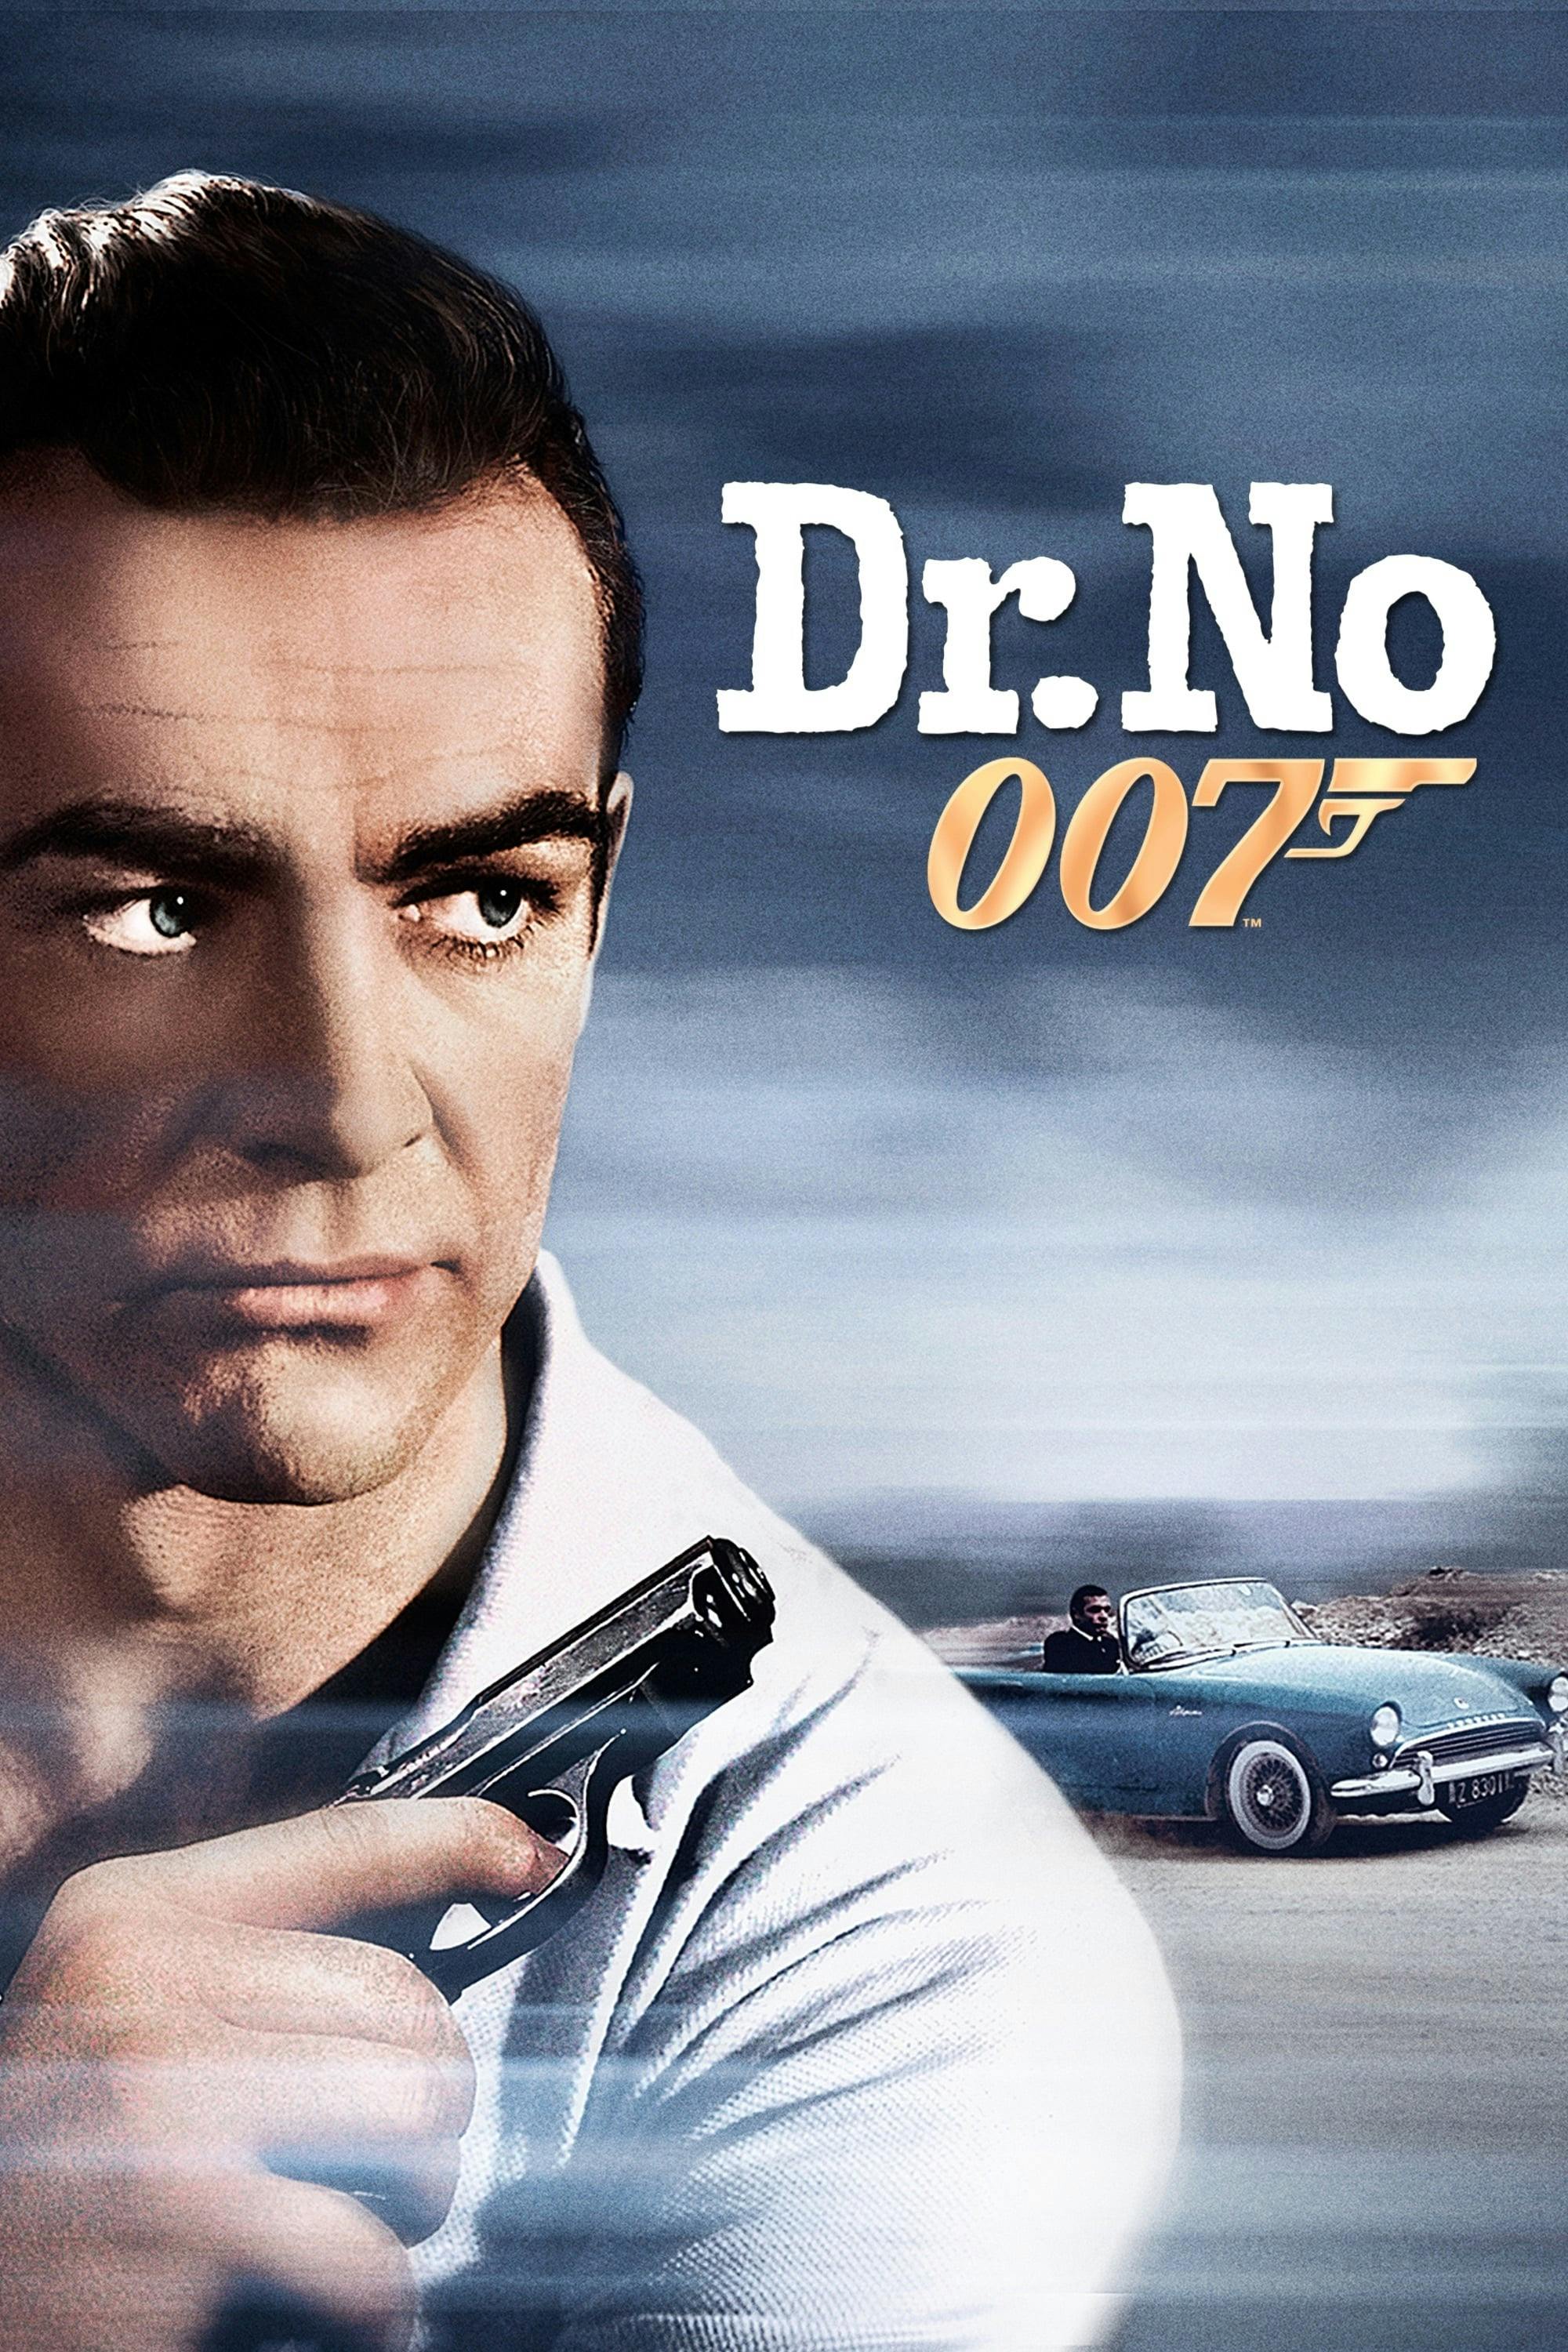 All James Bond movies to watch on Amazon or iTunes